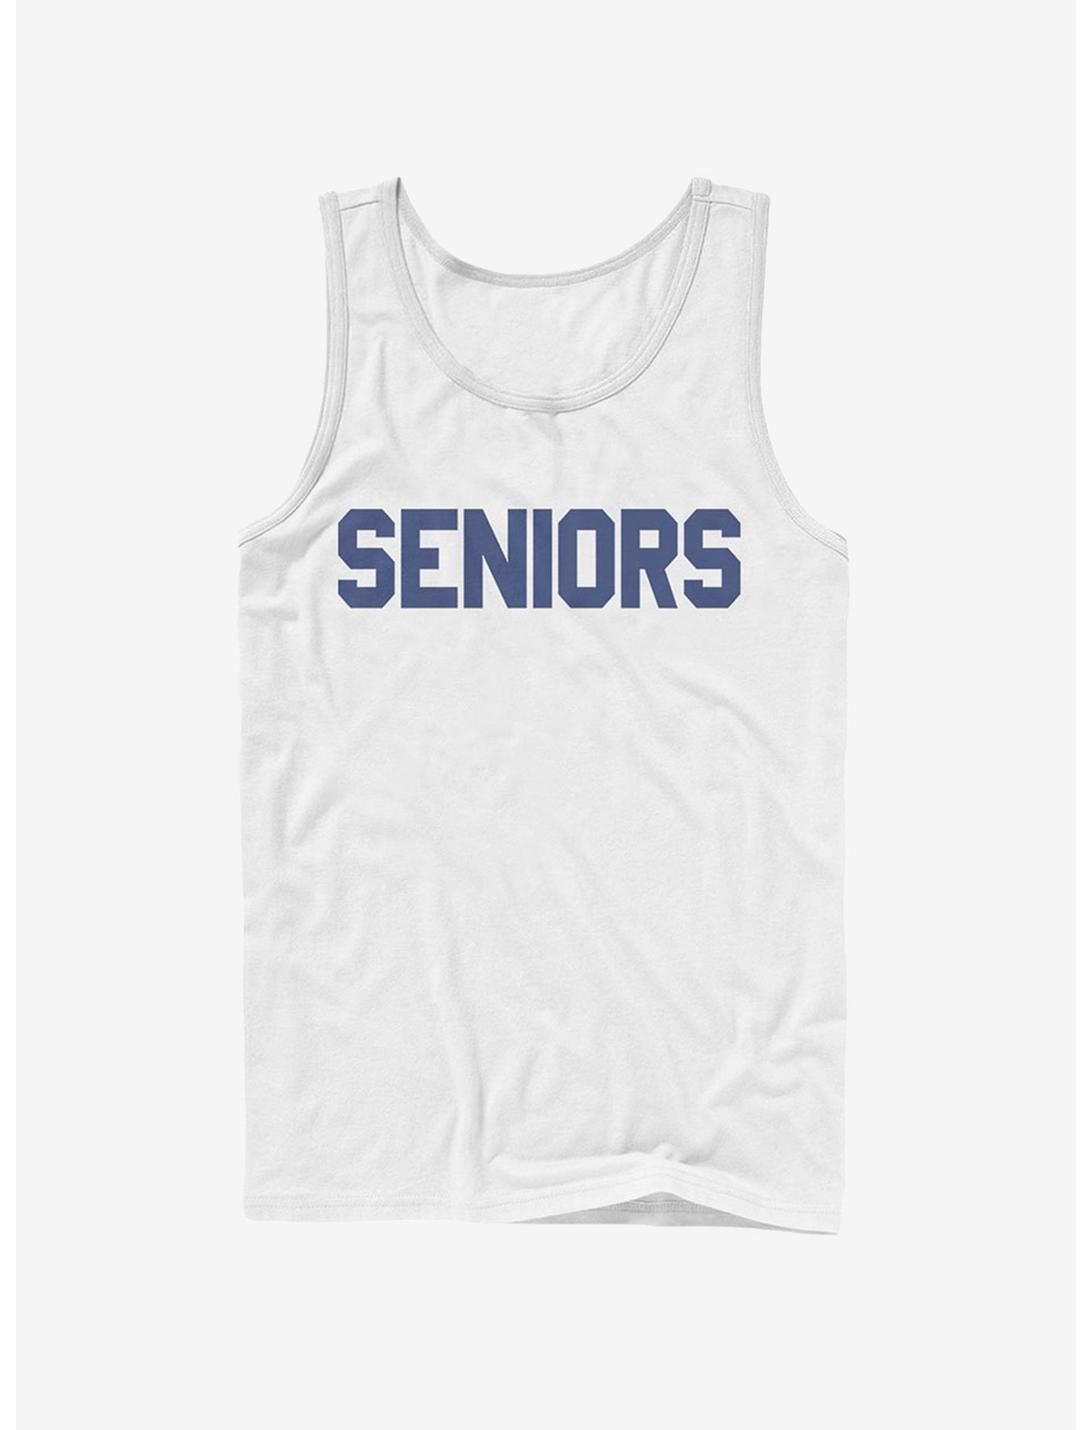 Dazed and Confused Seniors Tank Top, WHITE, hi-res